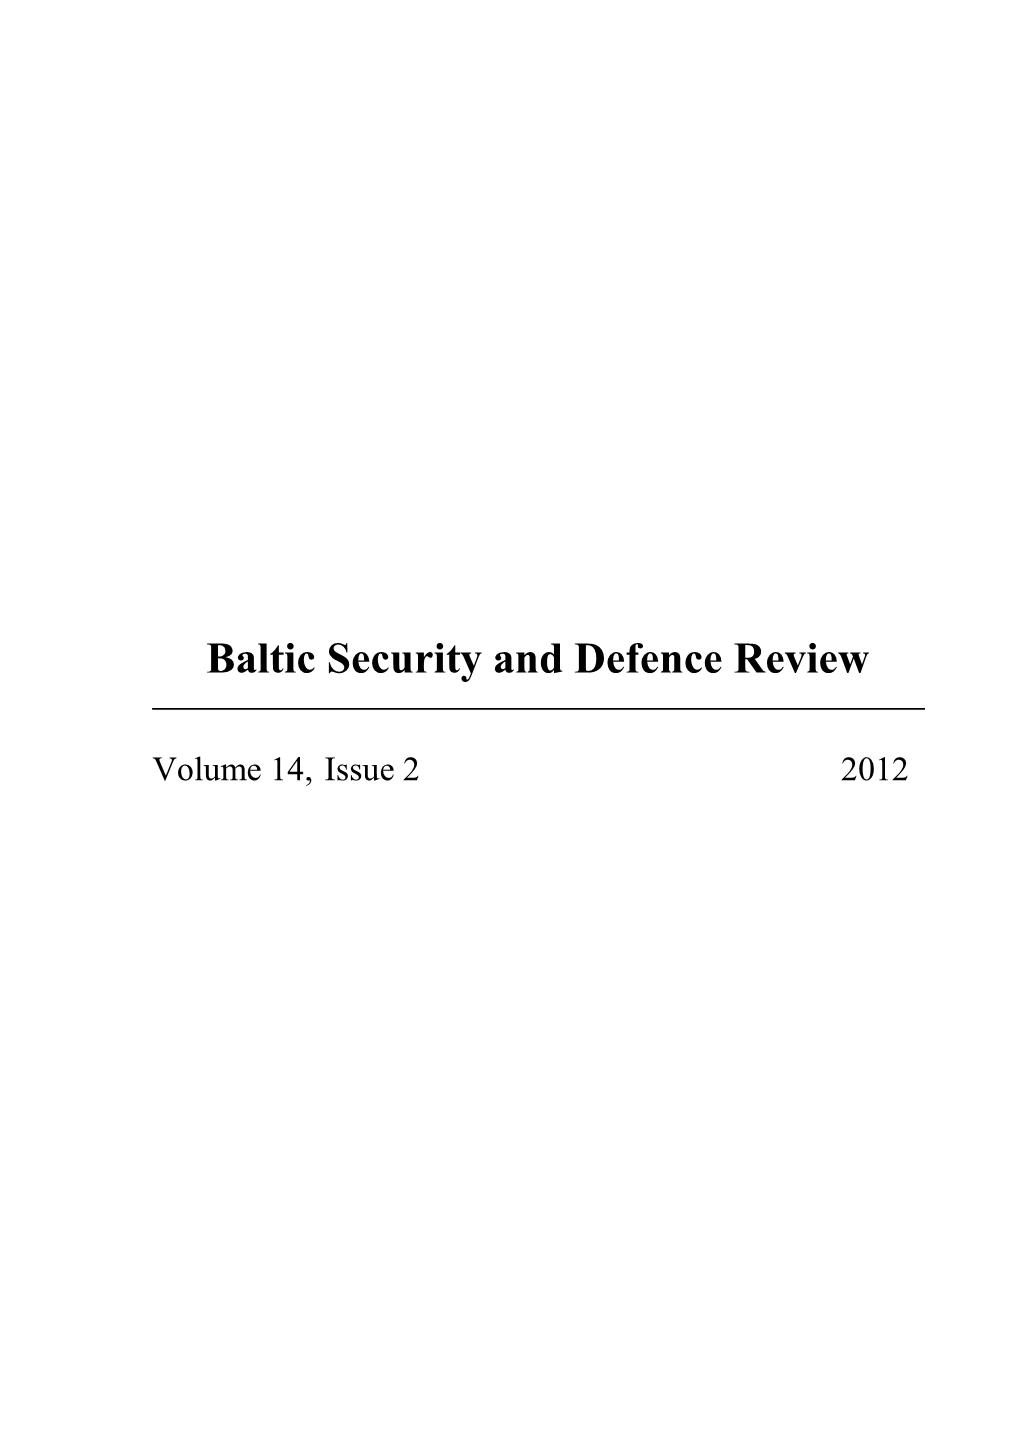 Baltic Security and Defence Review, 2012